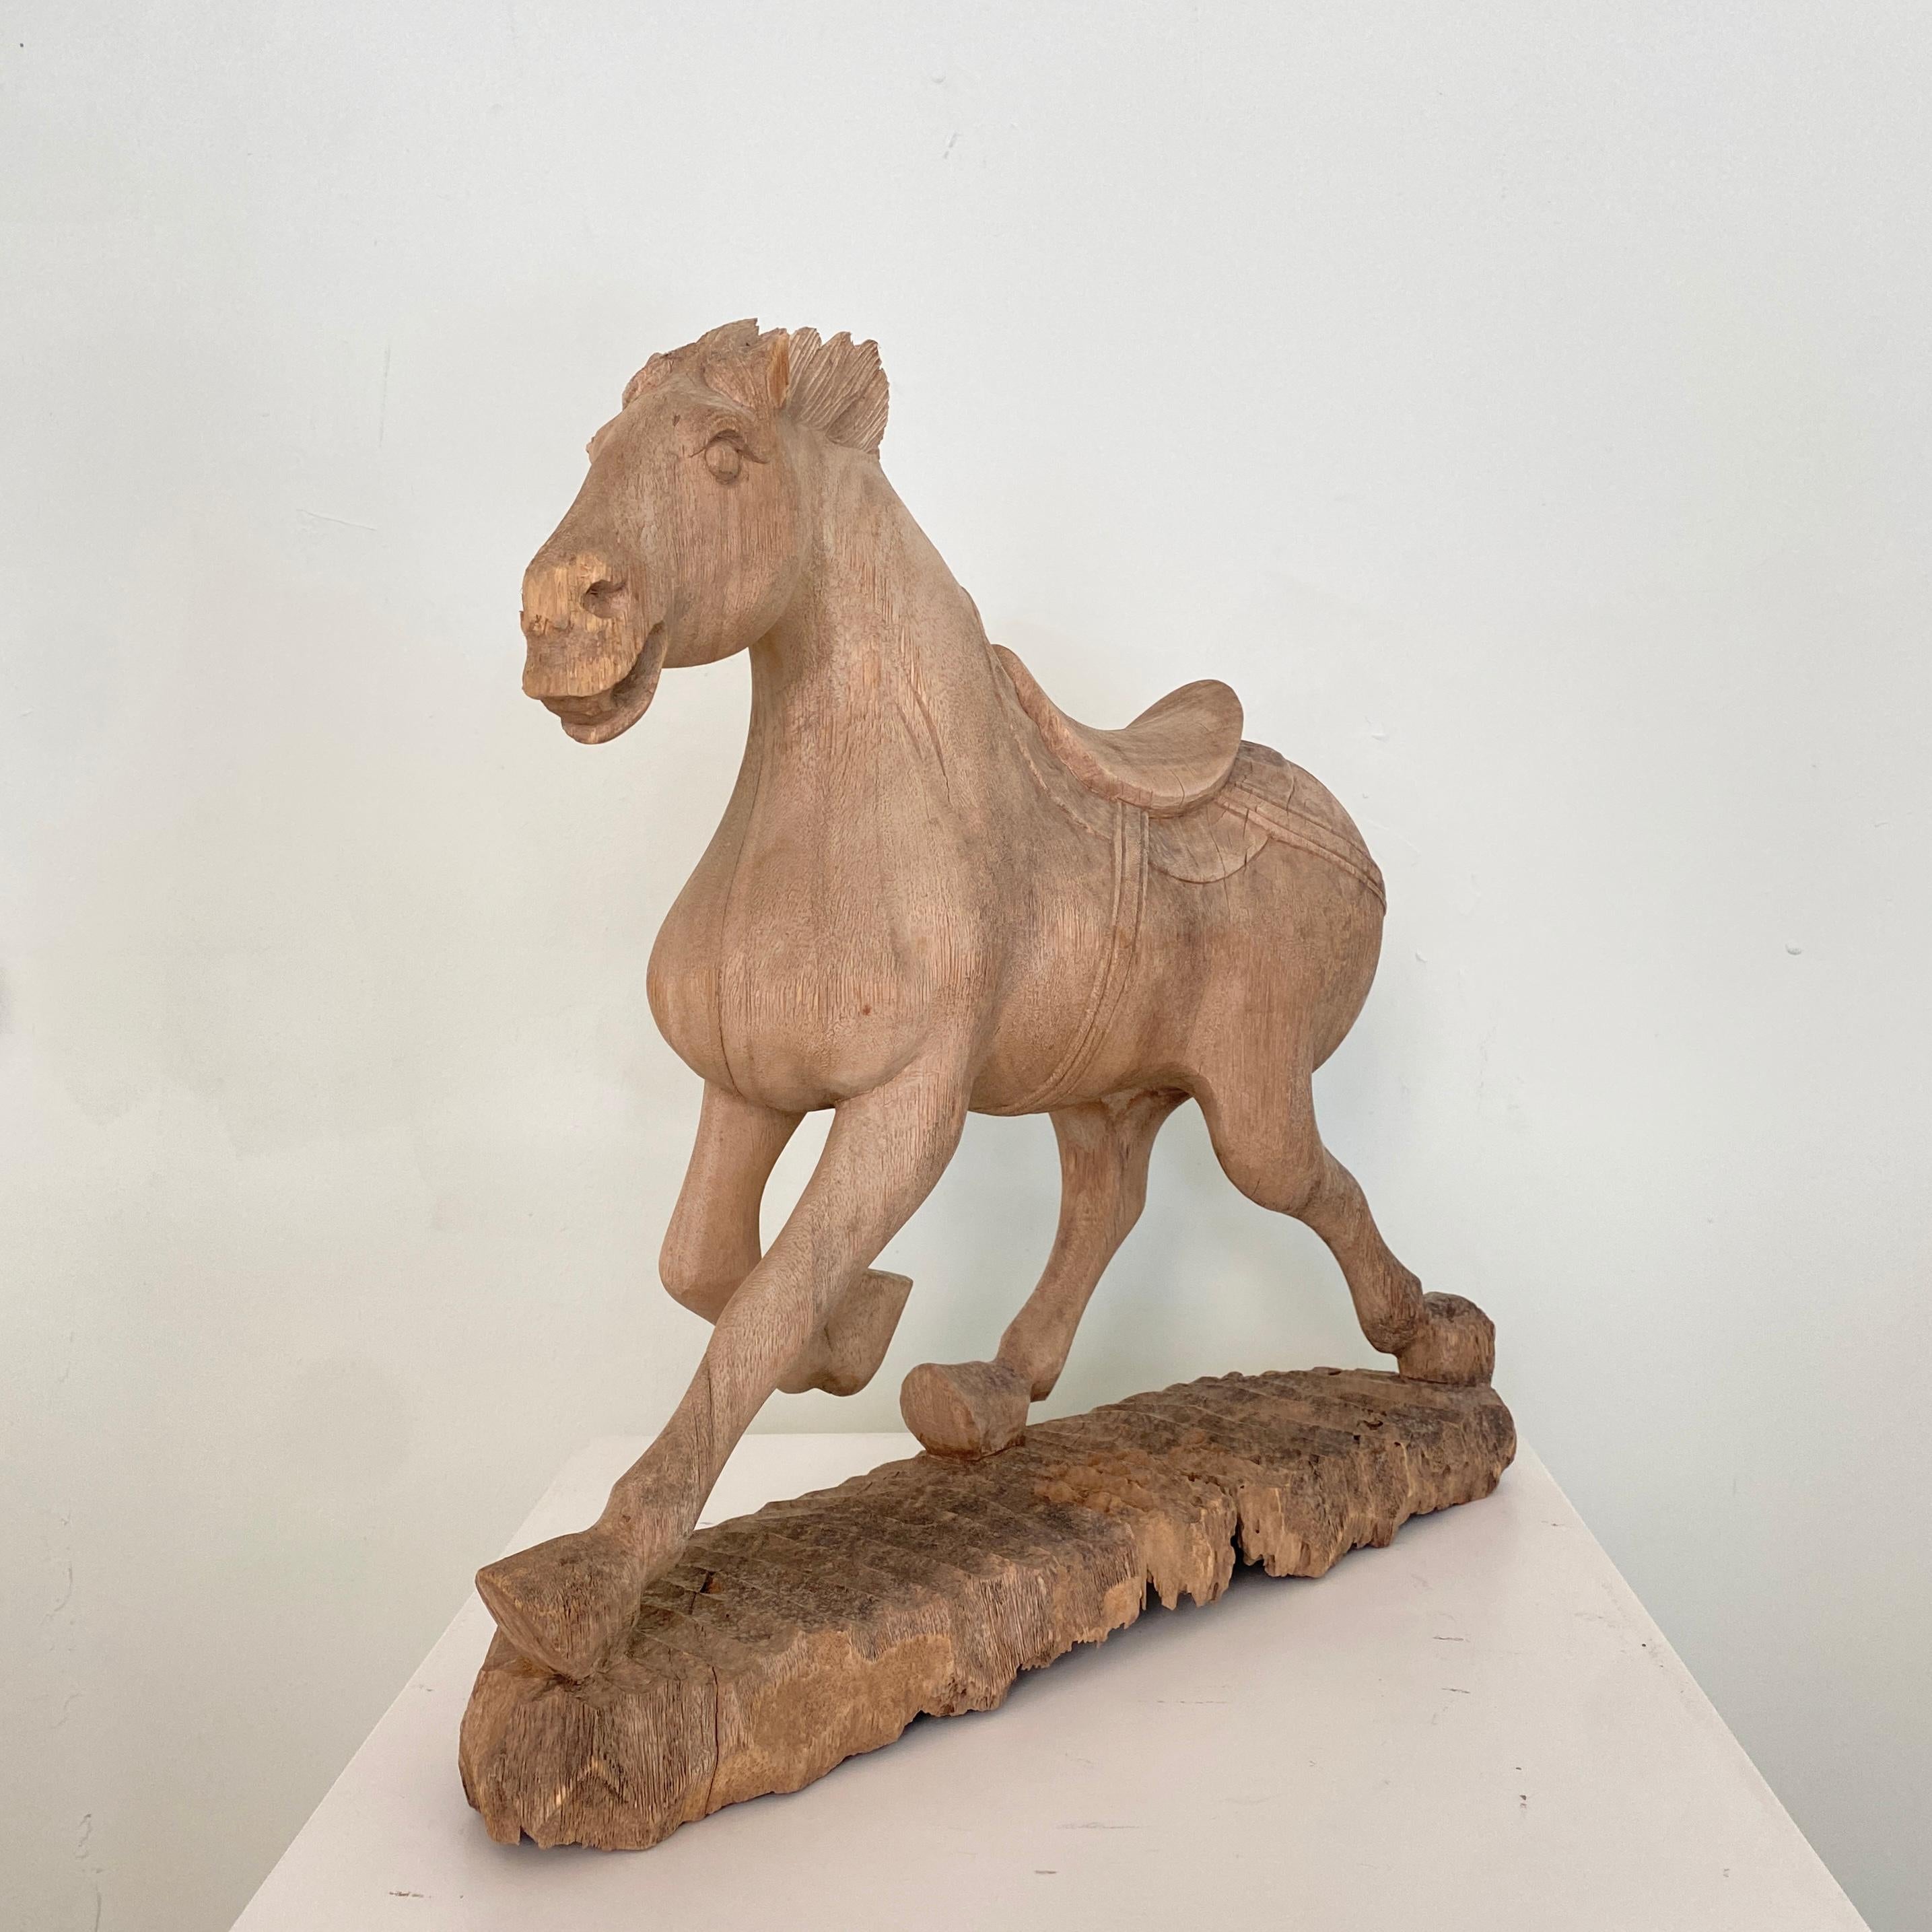 This late 19th century Chinese carved wooden tang horse was made and carved around 1870.
It has got some missing parts like the tail and some chips of the forelock.
Probably it was painted originally, but the sculpture and the wood have got a